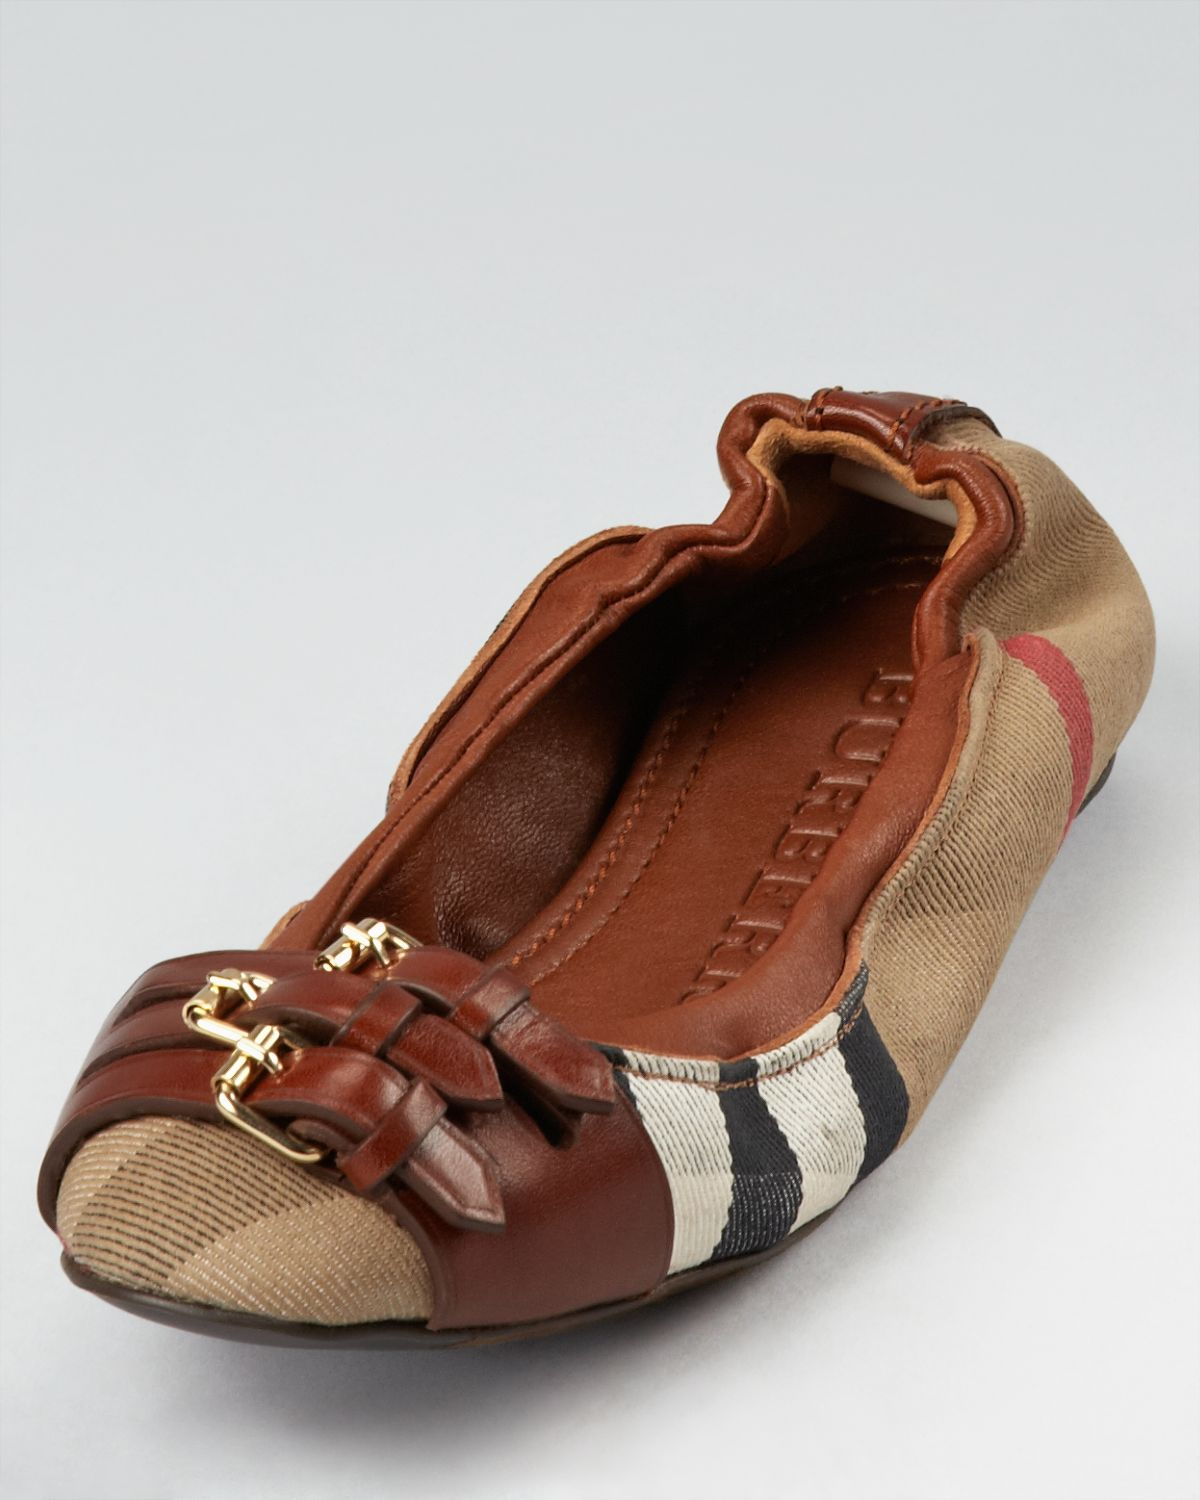 burberry slippers sale